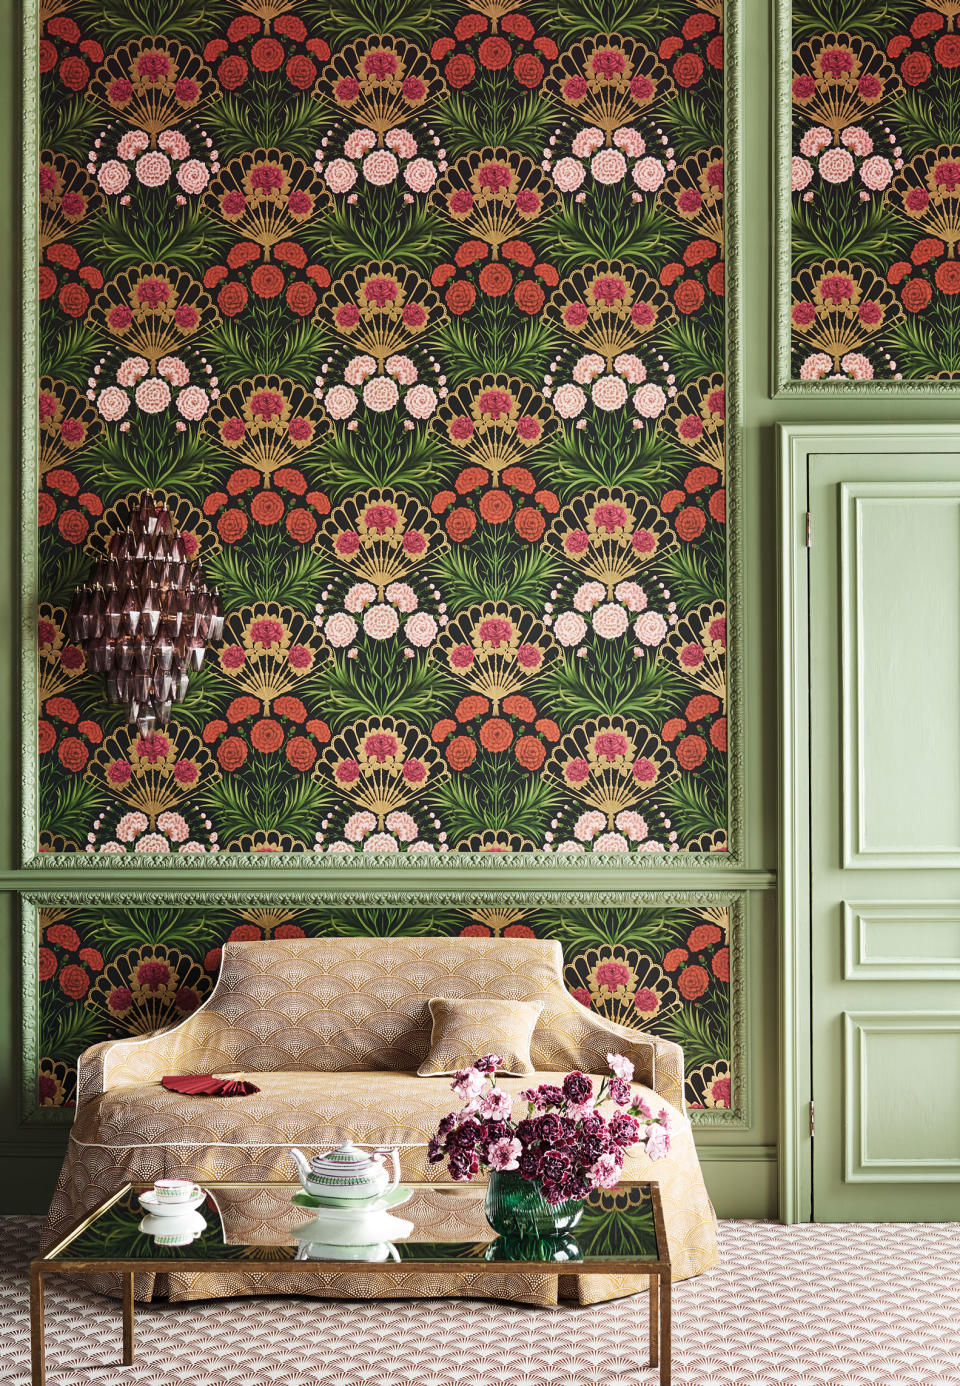 Match your woodwork color to your wallpaper